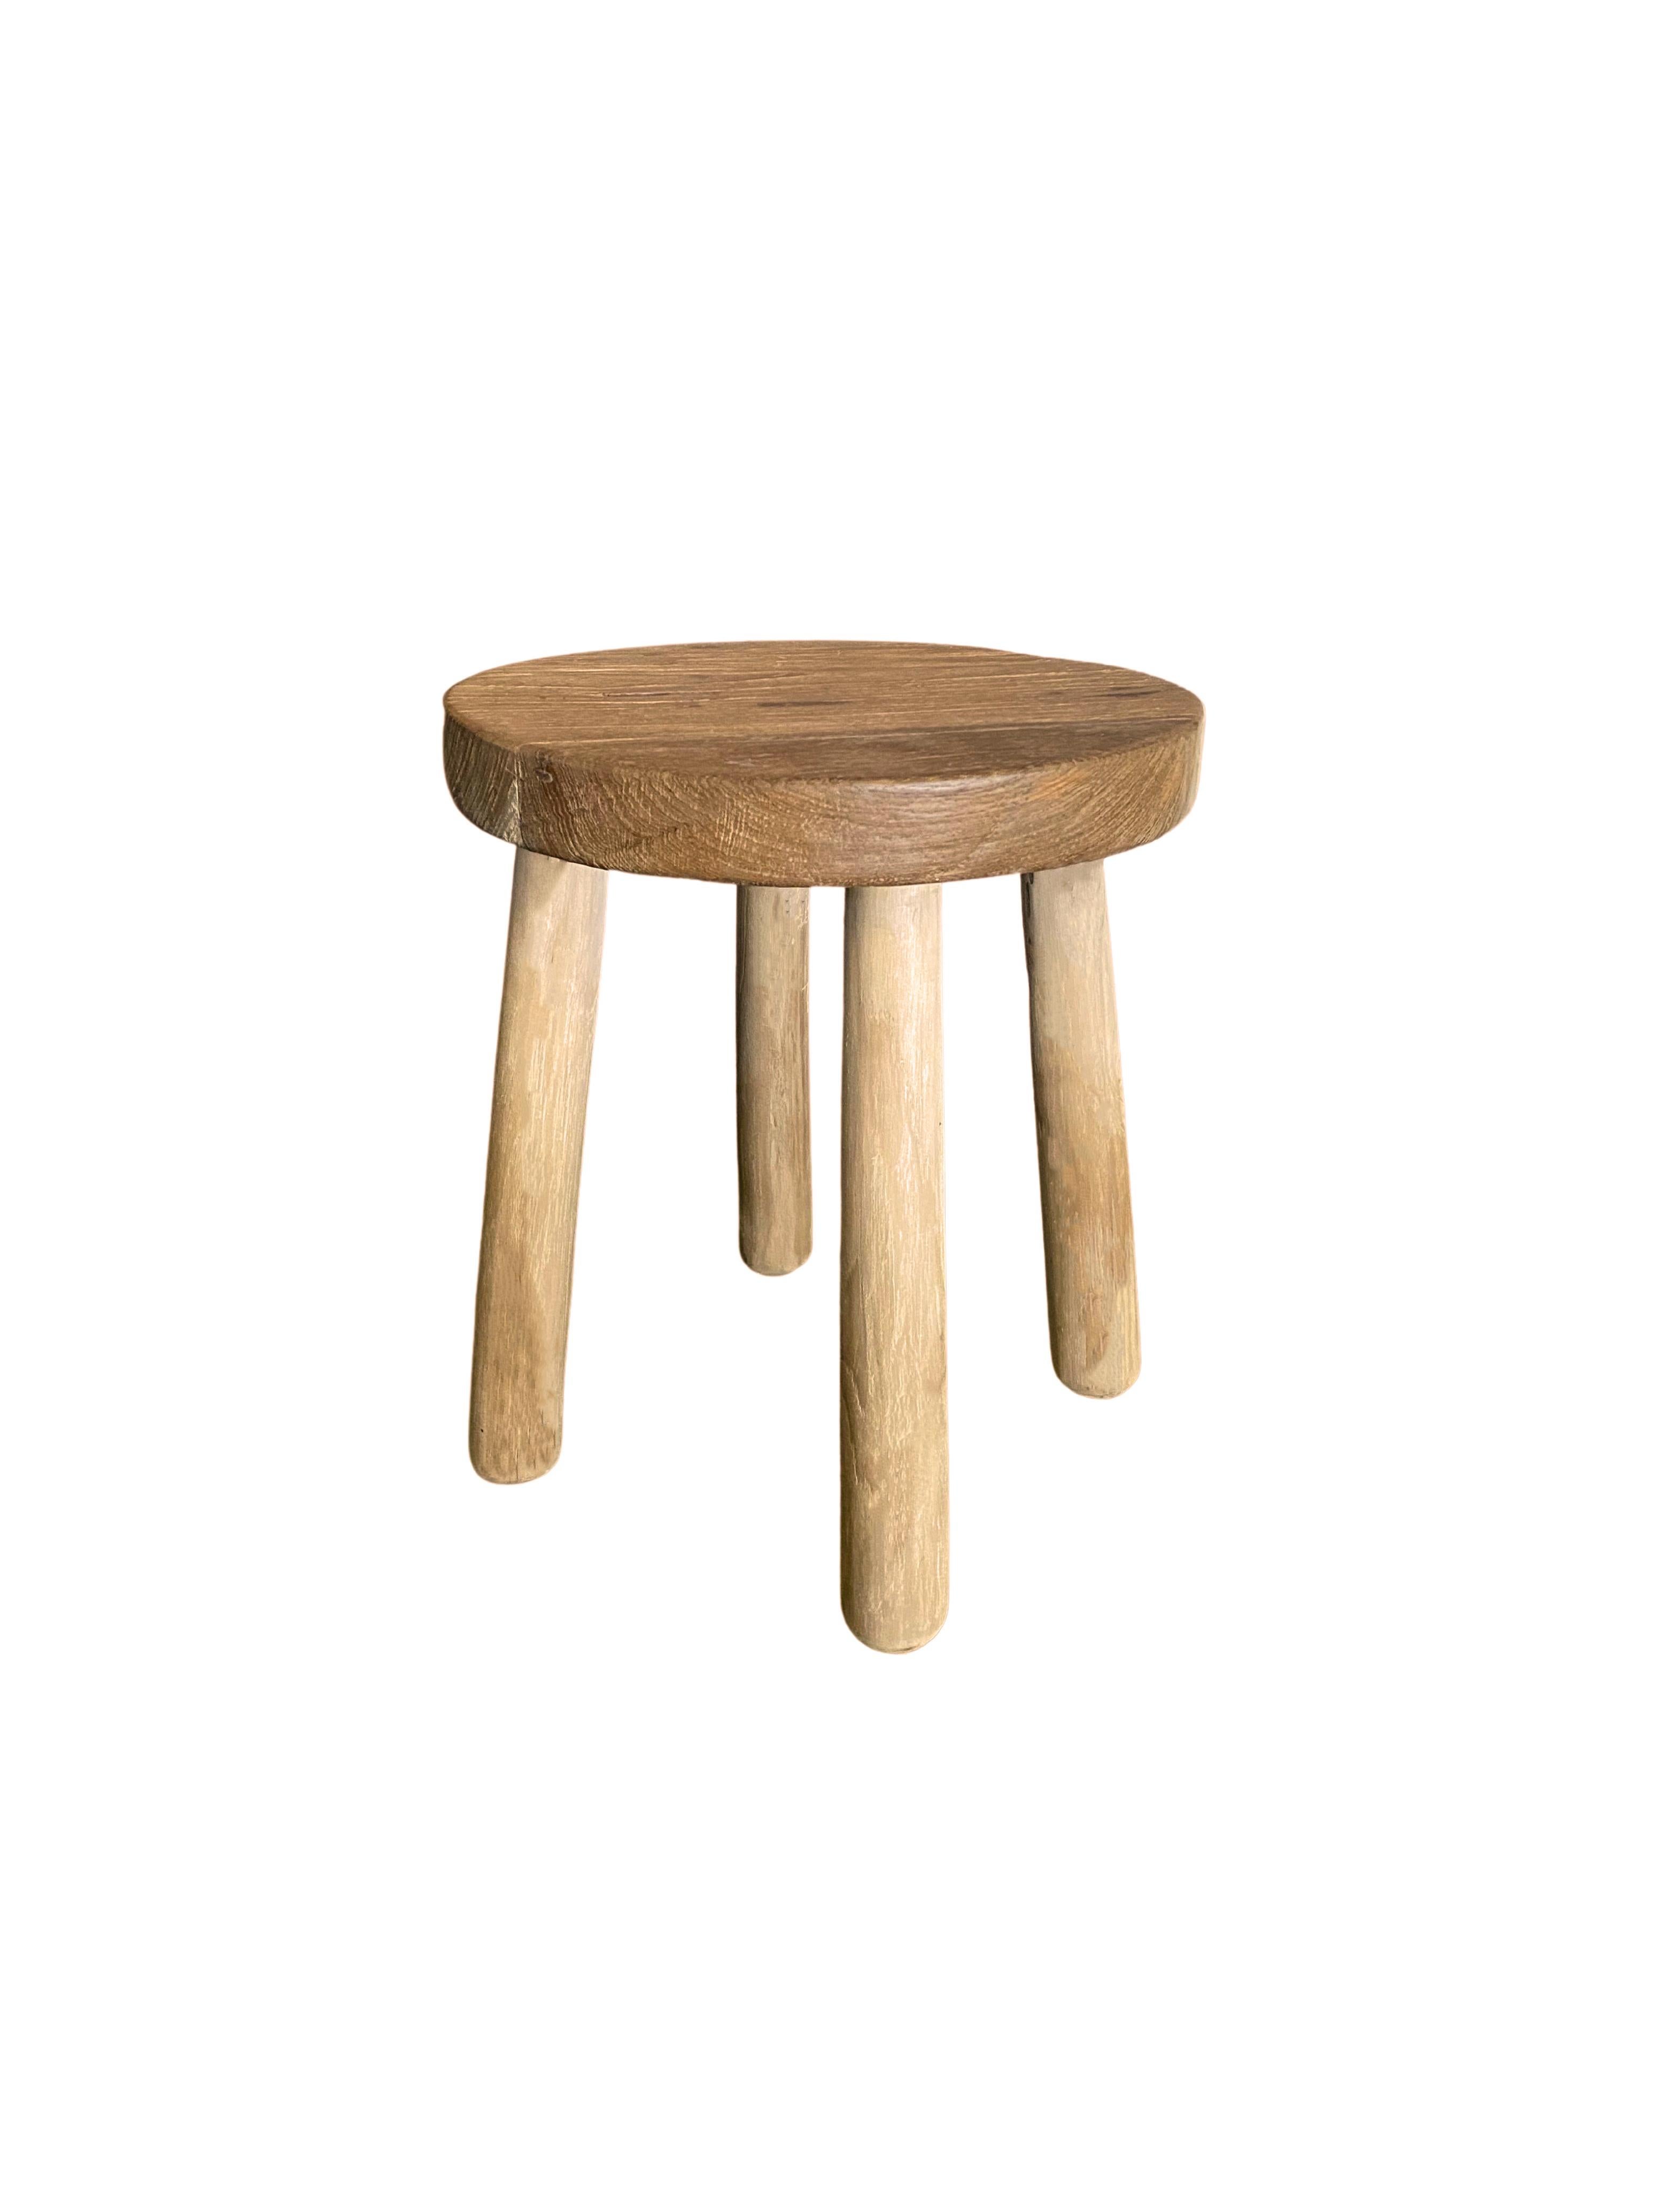 A sculptural teak wood stool with a mix of textures and shades. This stool features wonderful elongated legs that are slightly curved. The legs have been sanded down meticulously to create a smooth texture and contrast in colour to the seat which